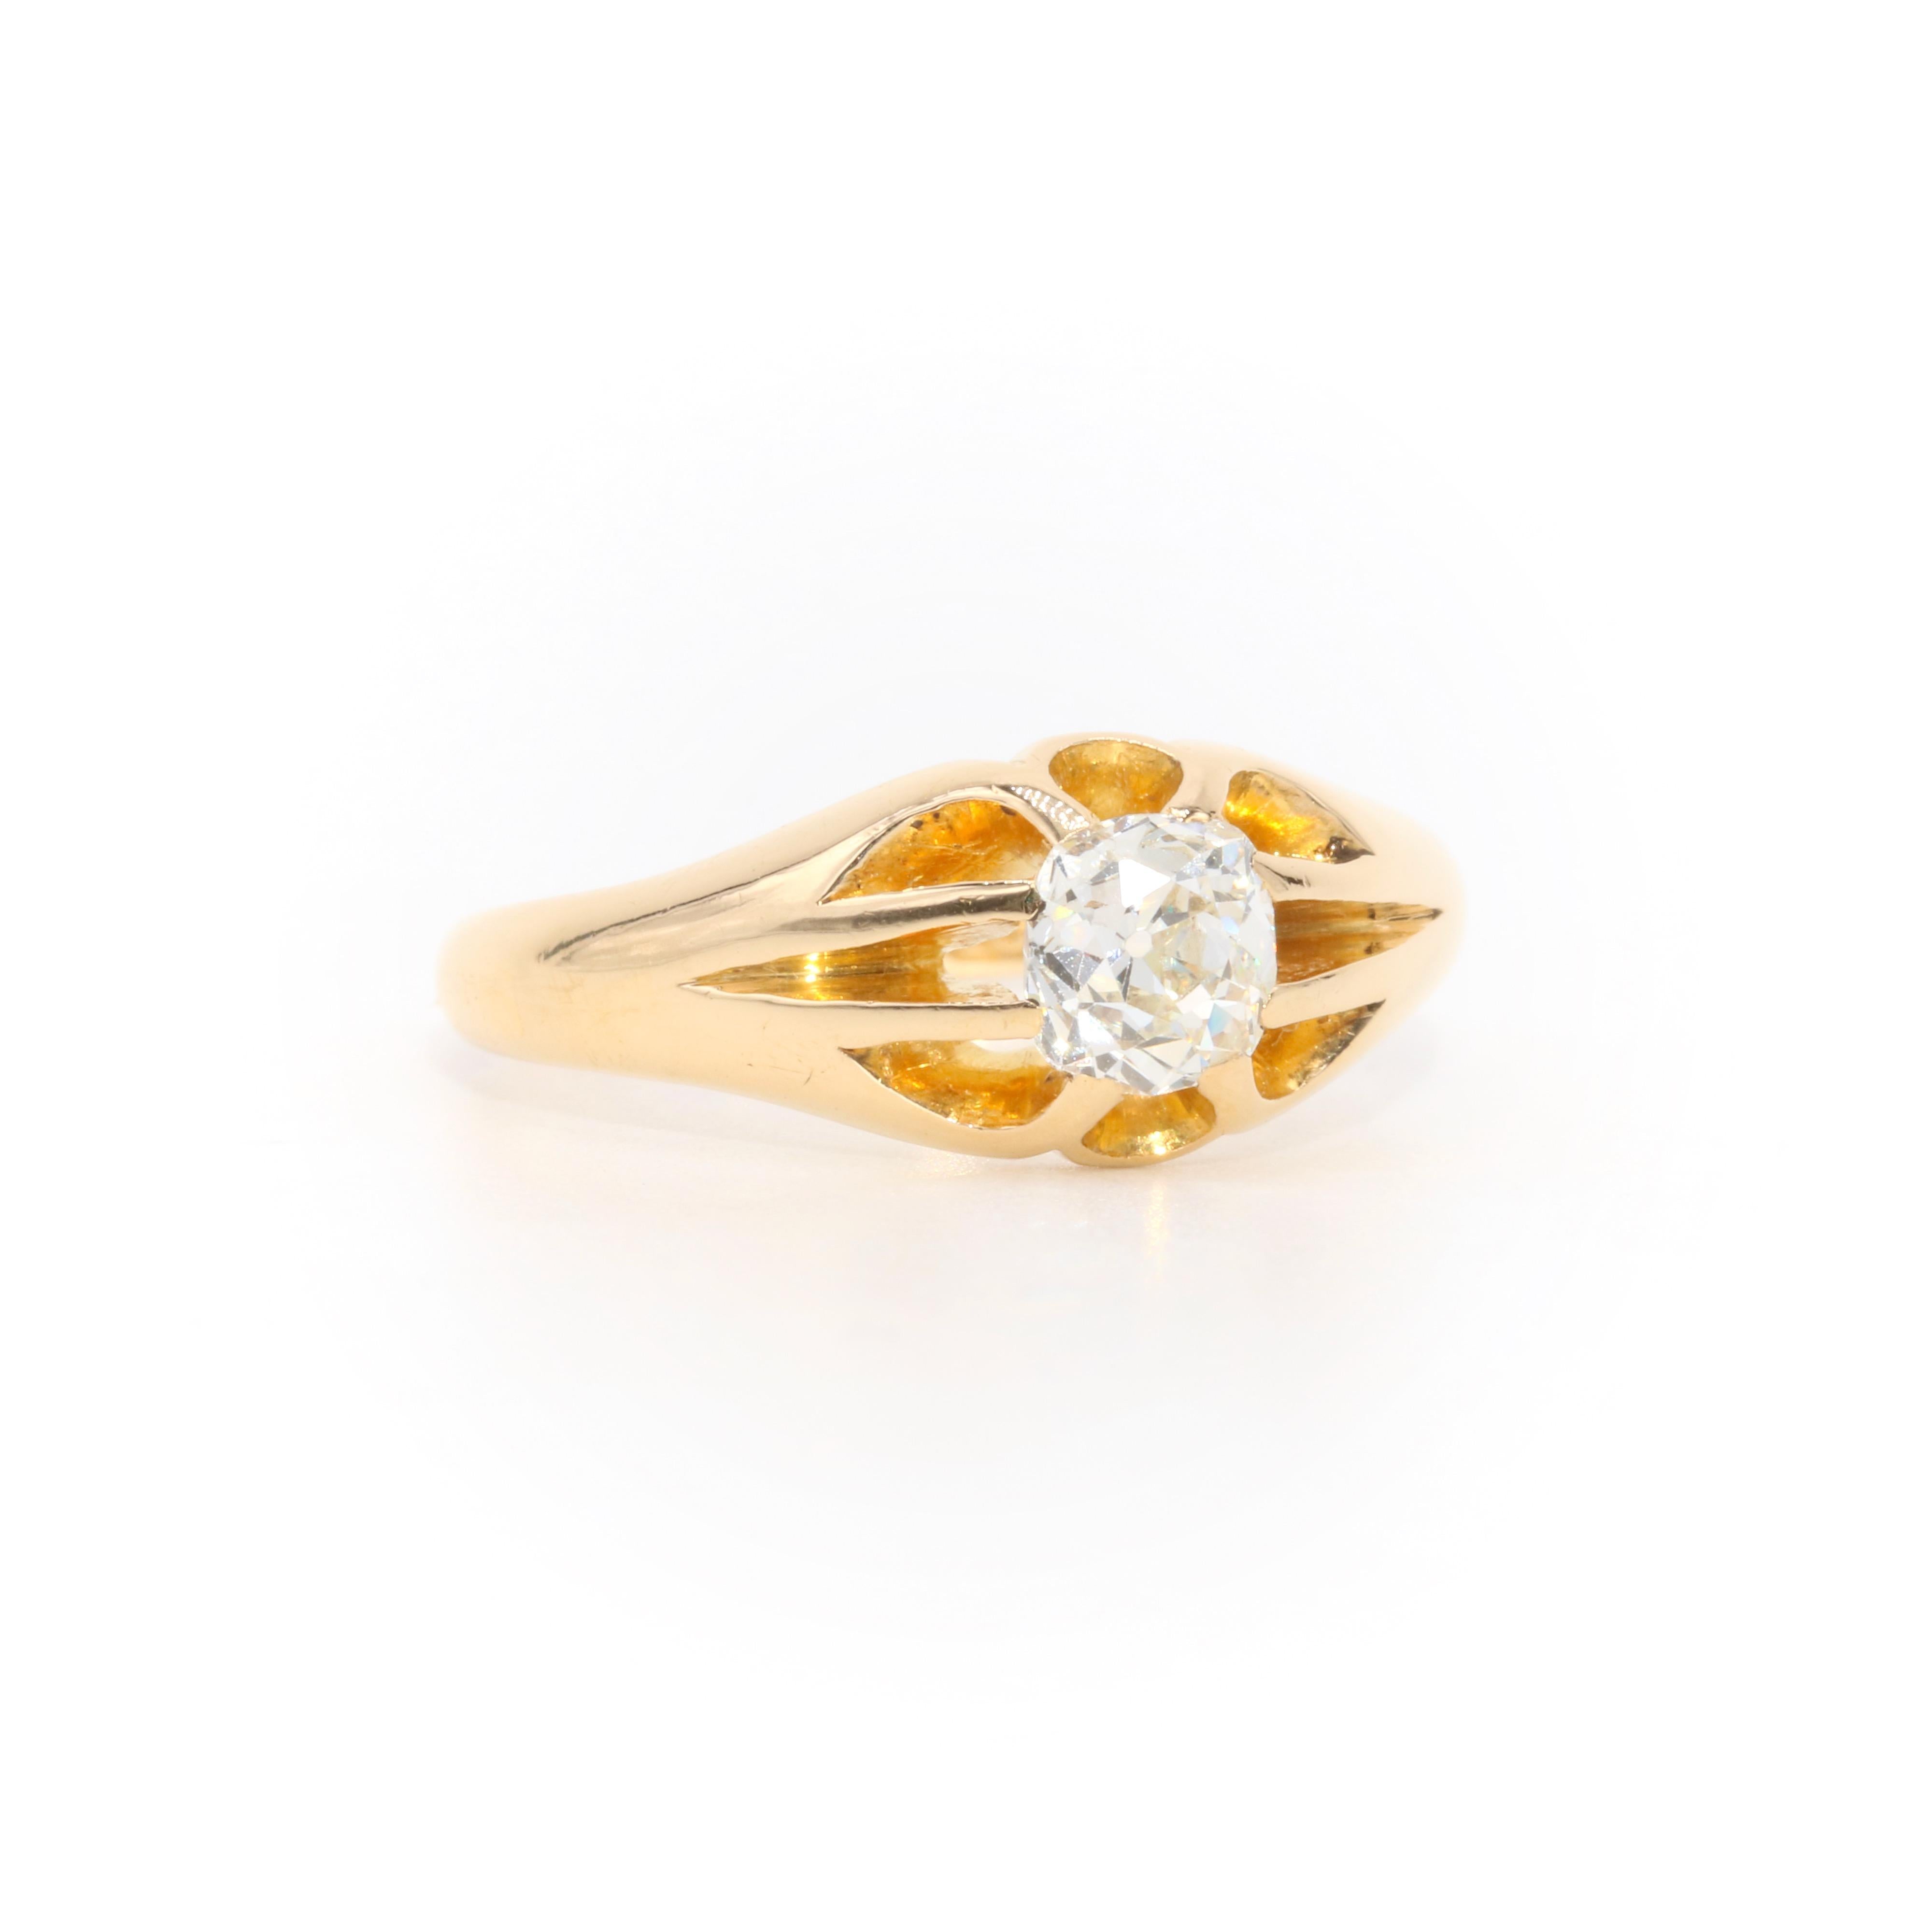 An antique diamond and yellow gold ring, comprising one large old mine cut diamond, set in 18 karat yellow gold, to a band of 18 karat yellow gold. 

This striking ring is set to the centre with a large old mine cut diamond. The diamond is